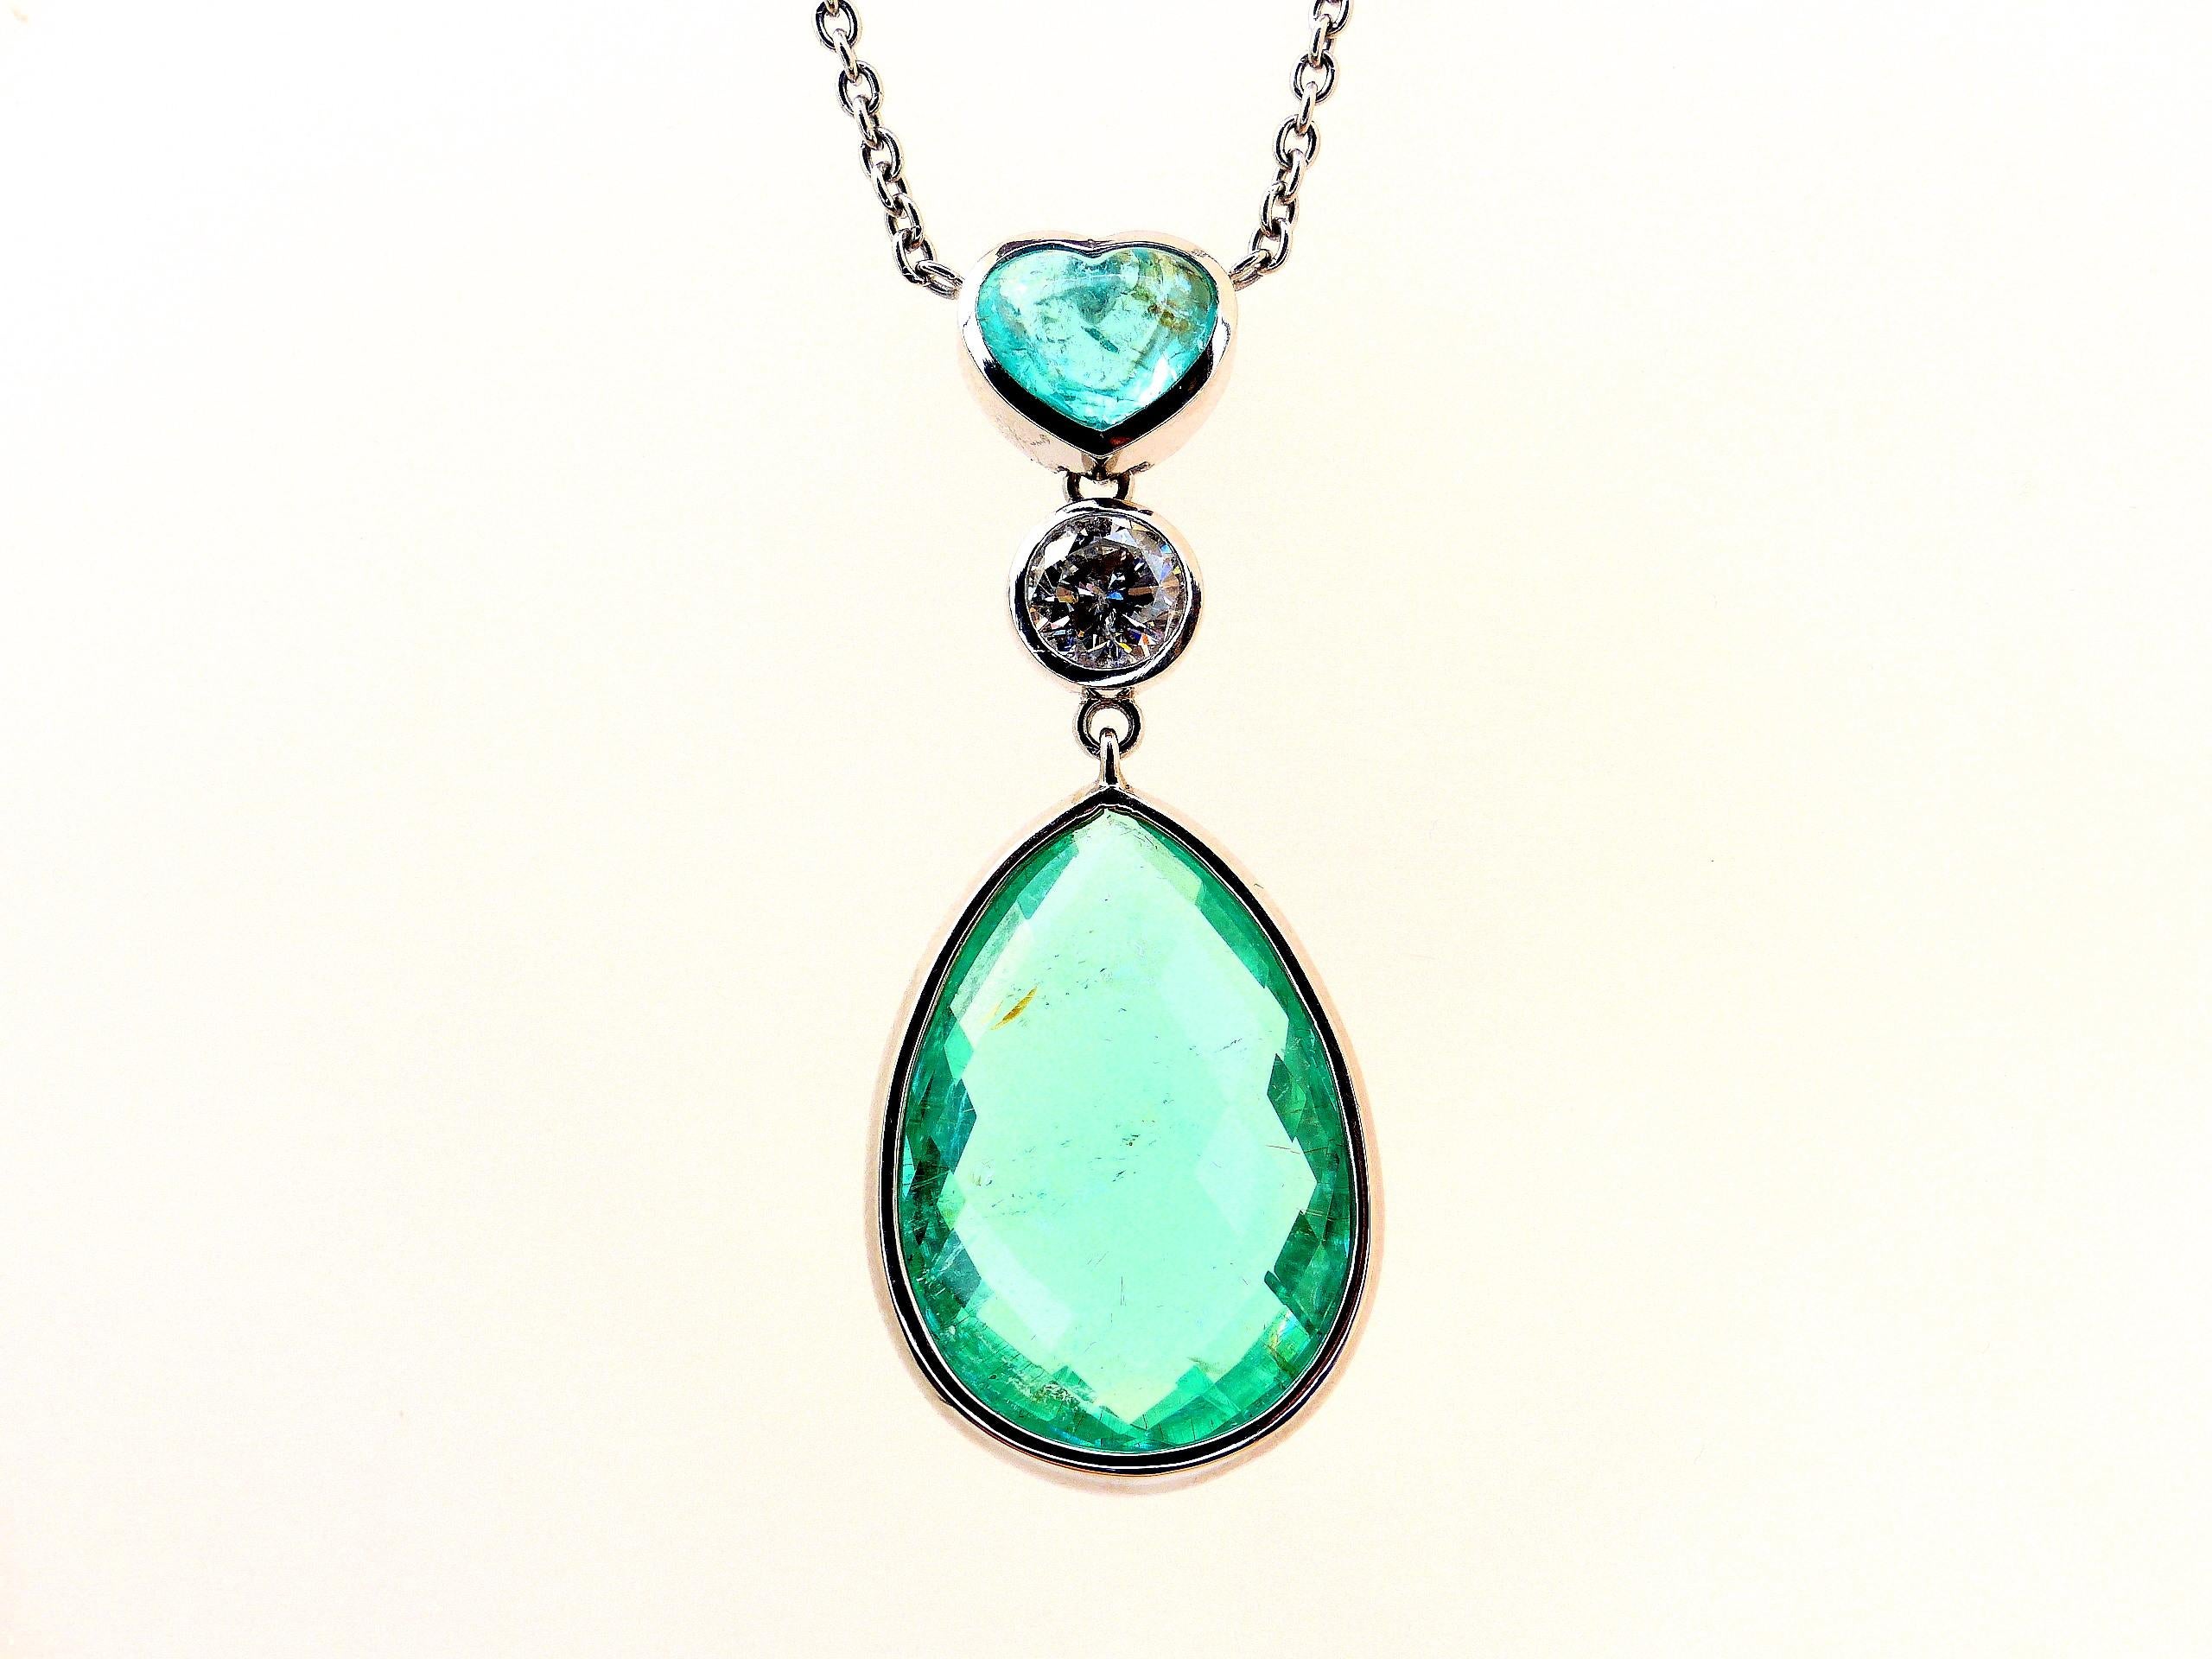 This 950/ Platinum (9.90g) Pendant is set with 1x fine Paraiba Tourmaline (Briolette-cut, 28x20x10mm, 38.79ct) + 1x Diamond (Brilliant-cut, 1.65ct, round 6.8mm, G/P2).

Paraiba Tourmalines are very popular and rare gemstones. The color is electric